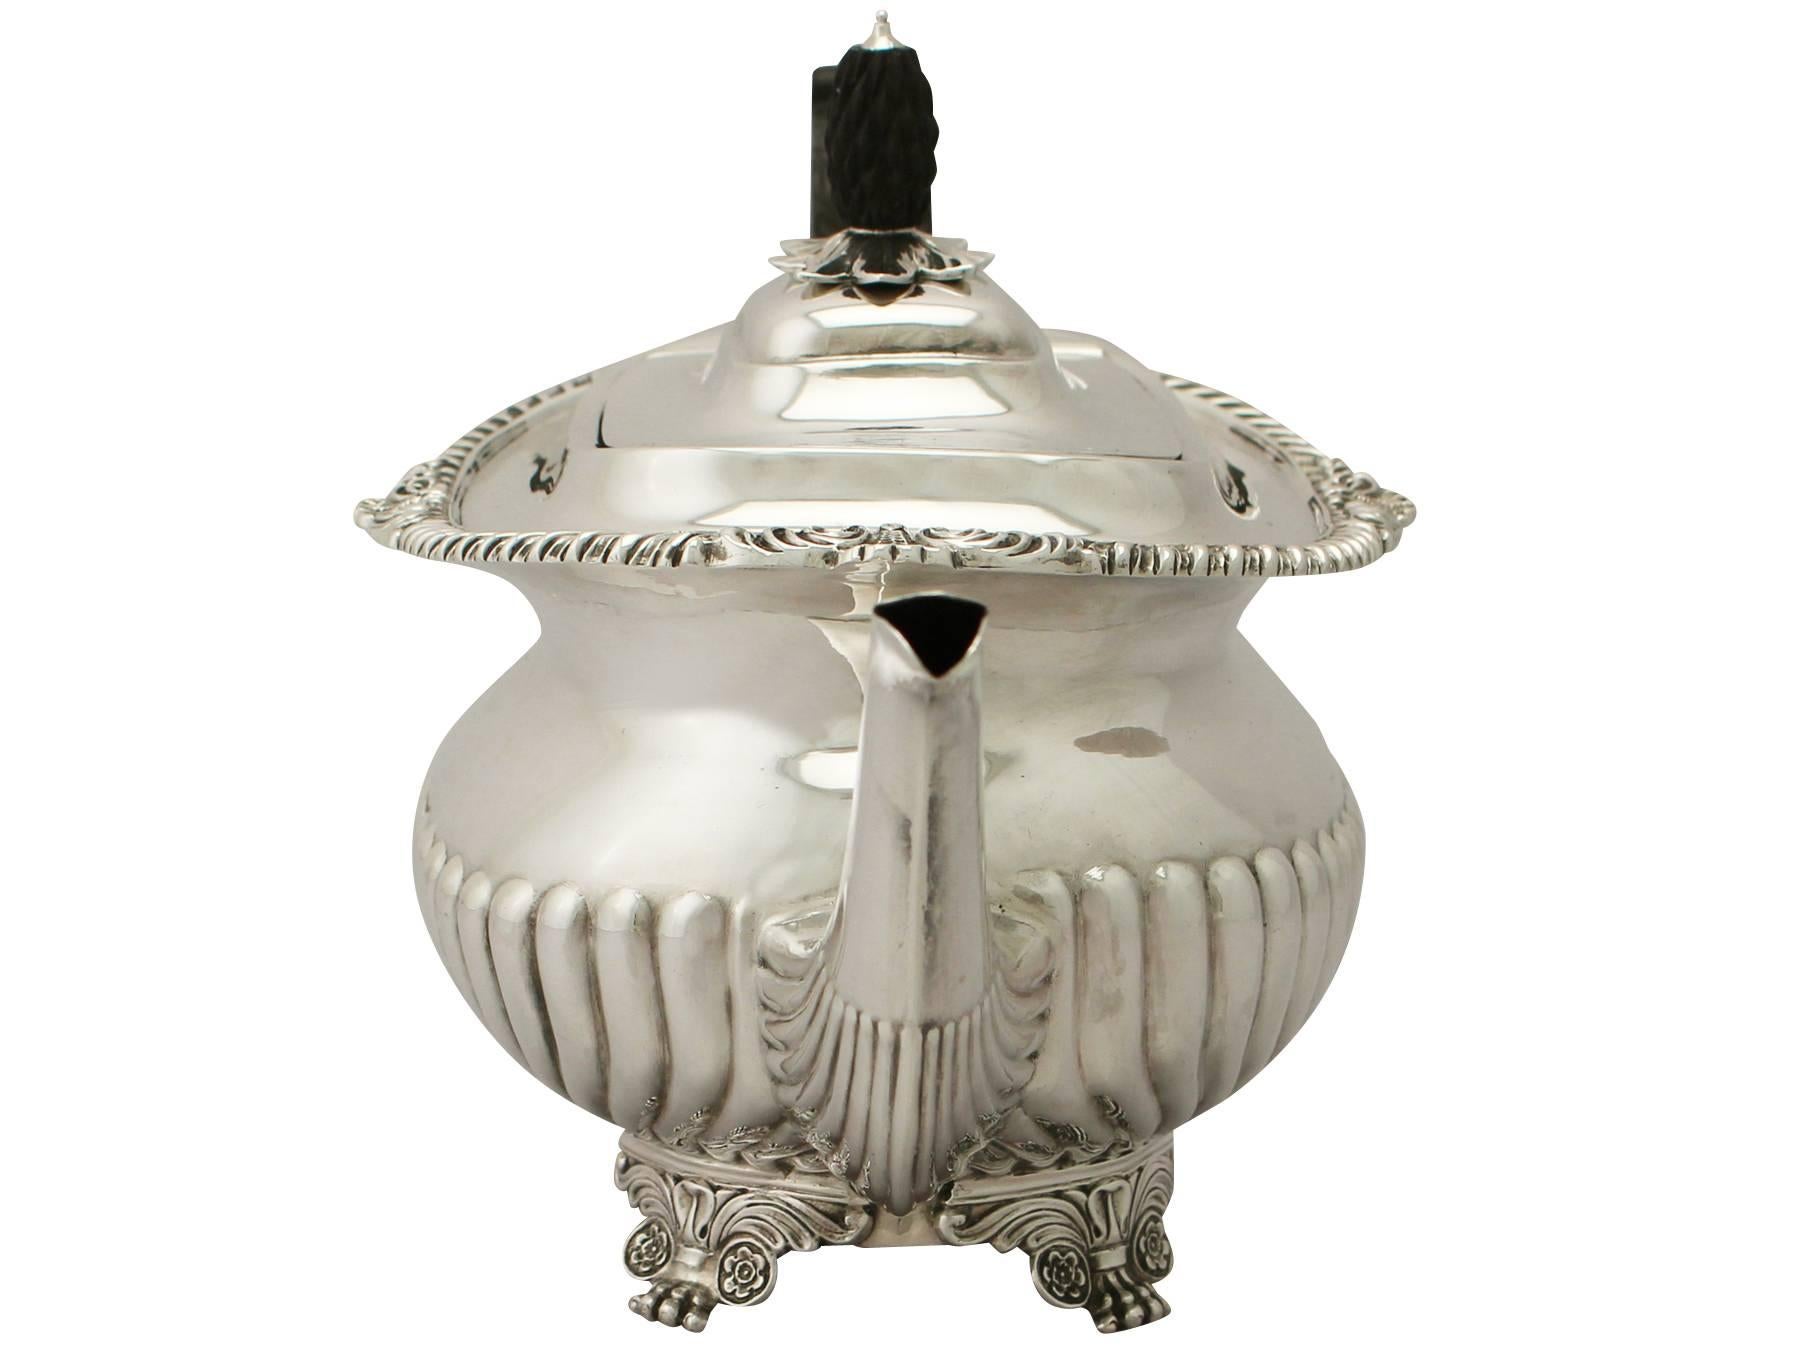 An exceptional, fine and impressive antique Victorian English sterling silver teapot; an addition to our silver teaware collection.

This exceptional antique Victorian sterling silver teapot has an oval rounded form onto four Regency style